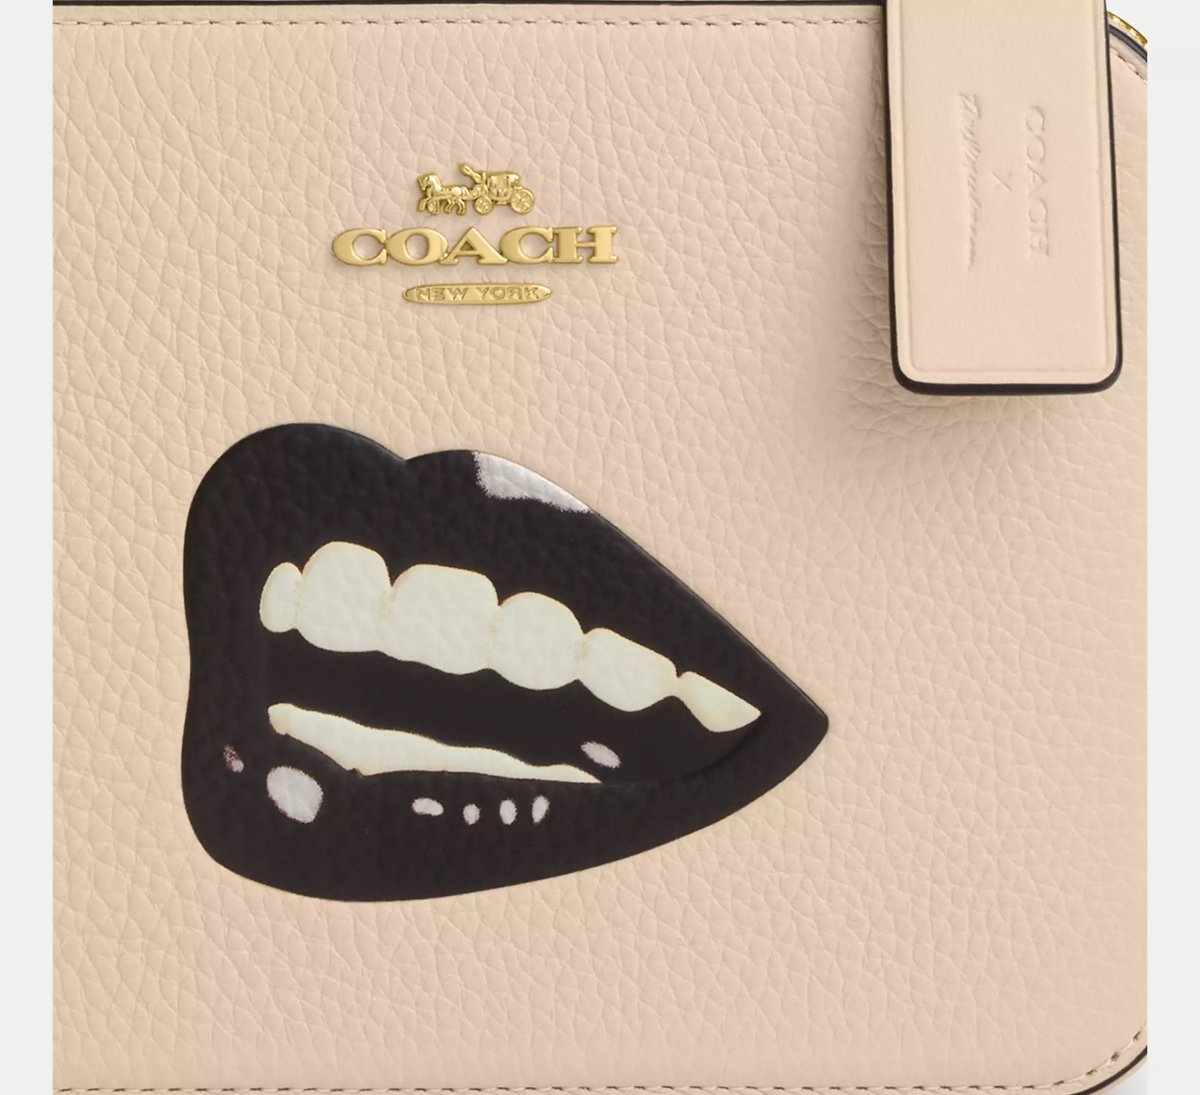 Carrying a piece of pop art everywhere I go – the stunning Coach X Tom Wesselmann LIPS Box Crossbody in Gold/Ivory. Embracing the beauty of form and function. Lips that speak volumes! 💄👜 #WearableArt #ebay #coachpurse #womensfashion #supportlocal #fashion #coachbags